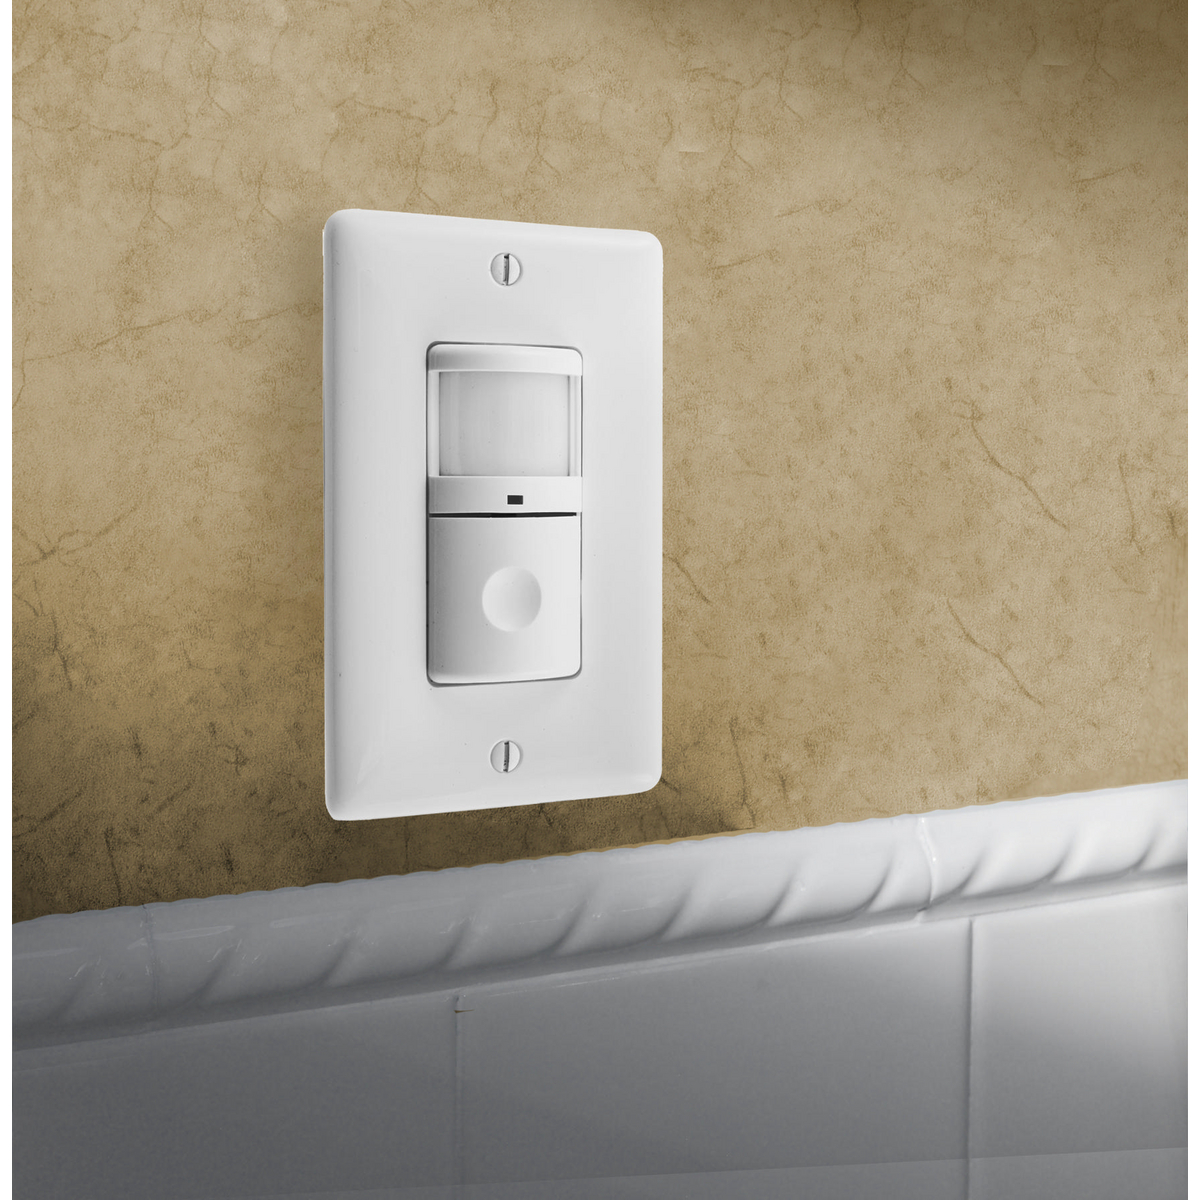 Hubbell ATP1277W Wall Switch Sensor 1 Button White for sale online 